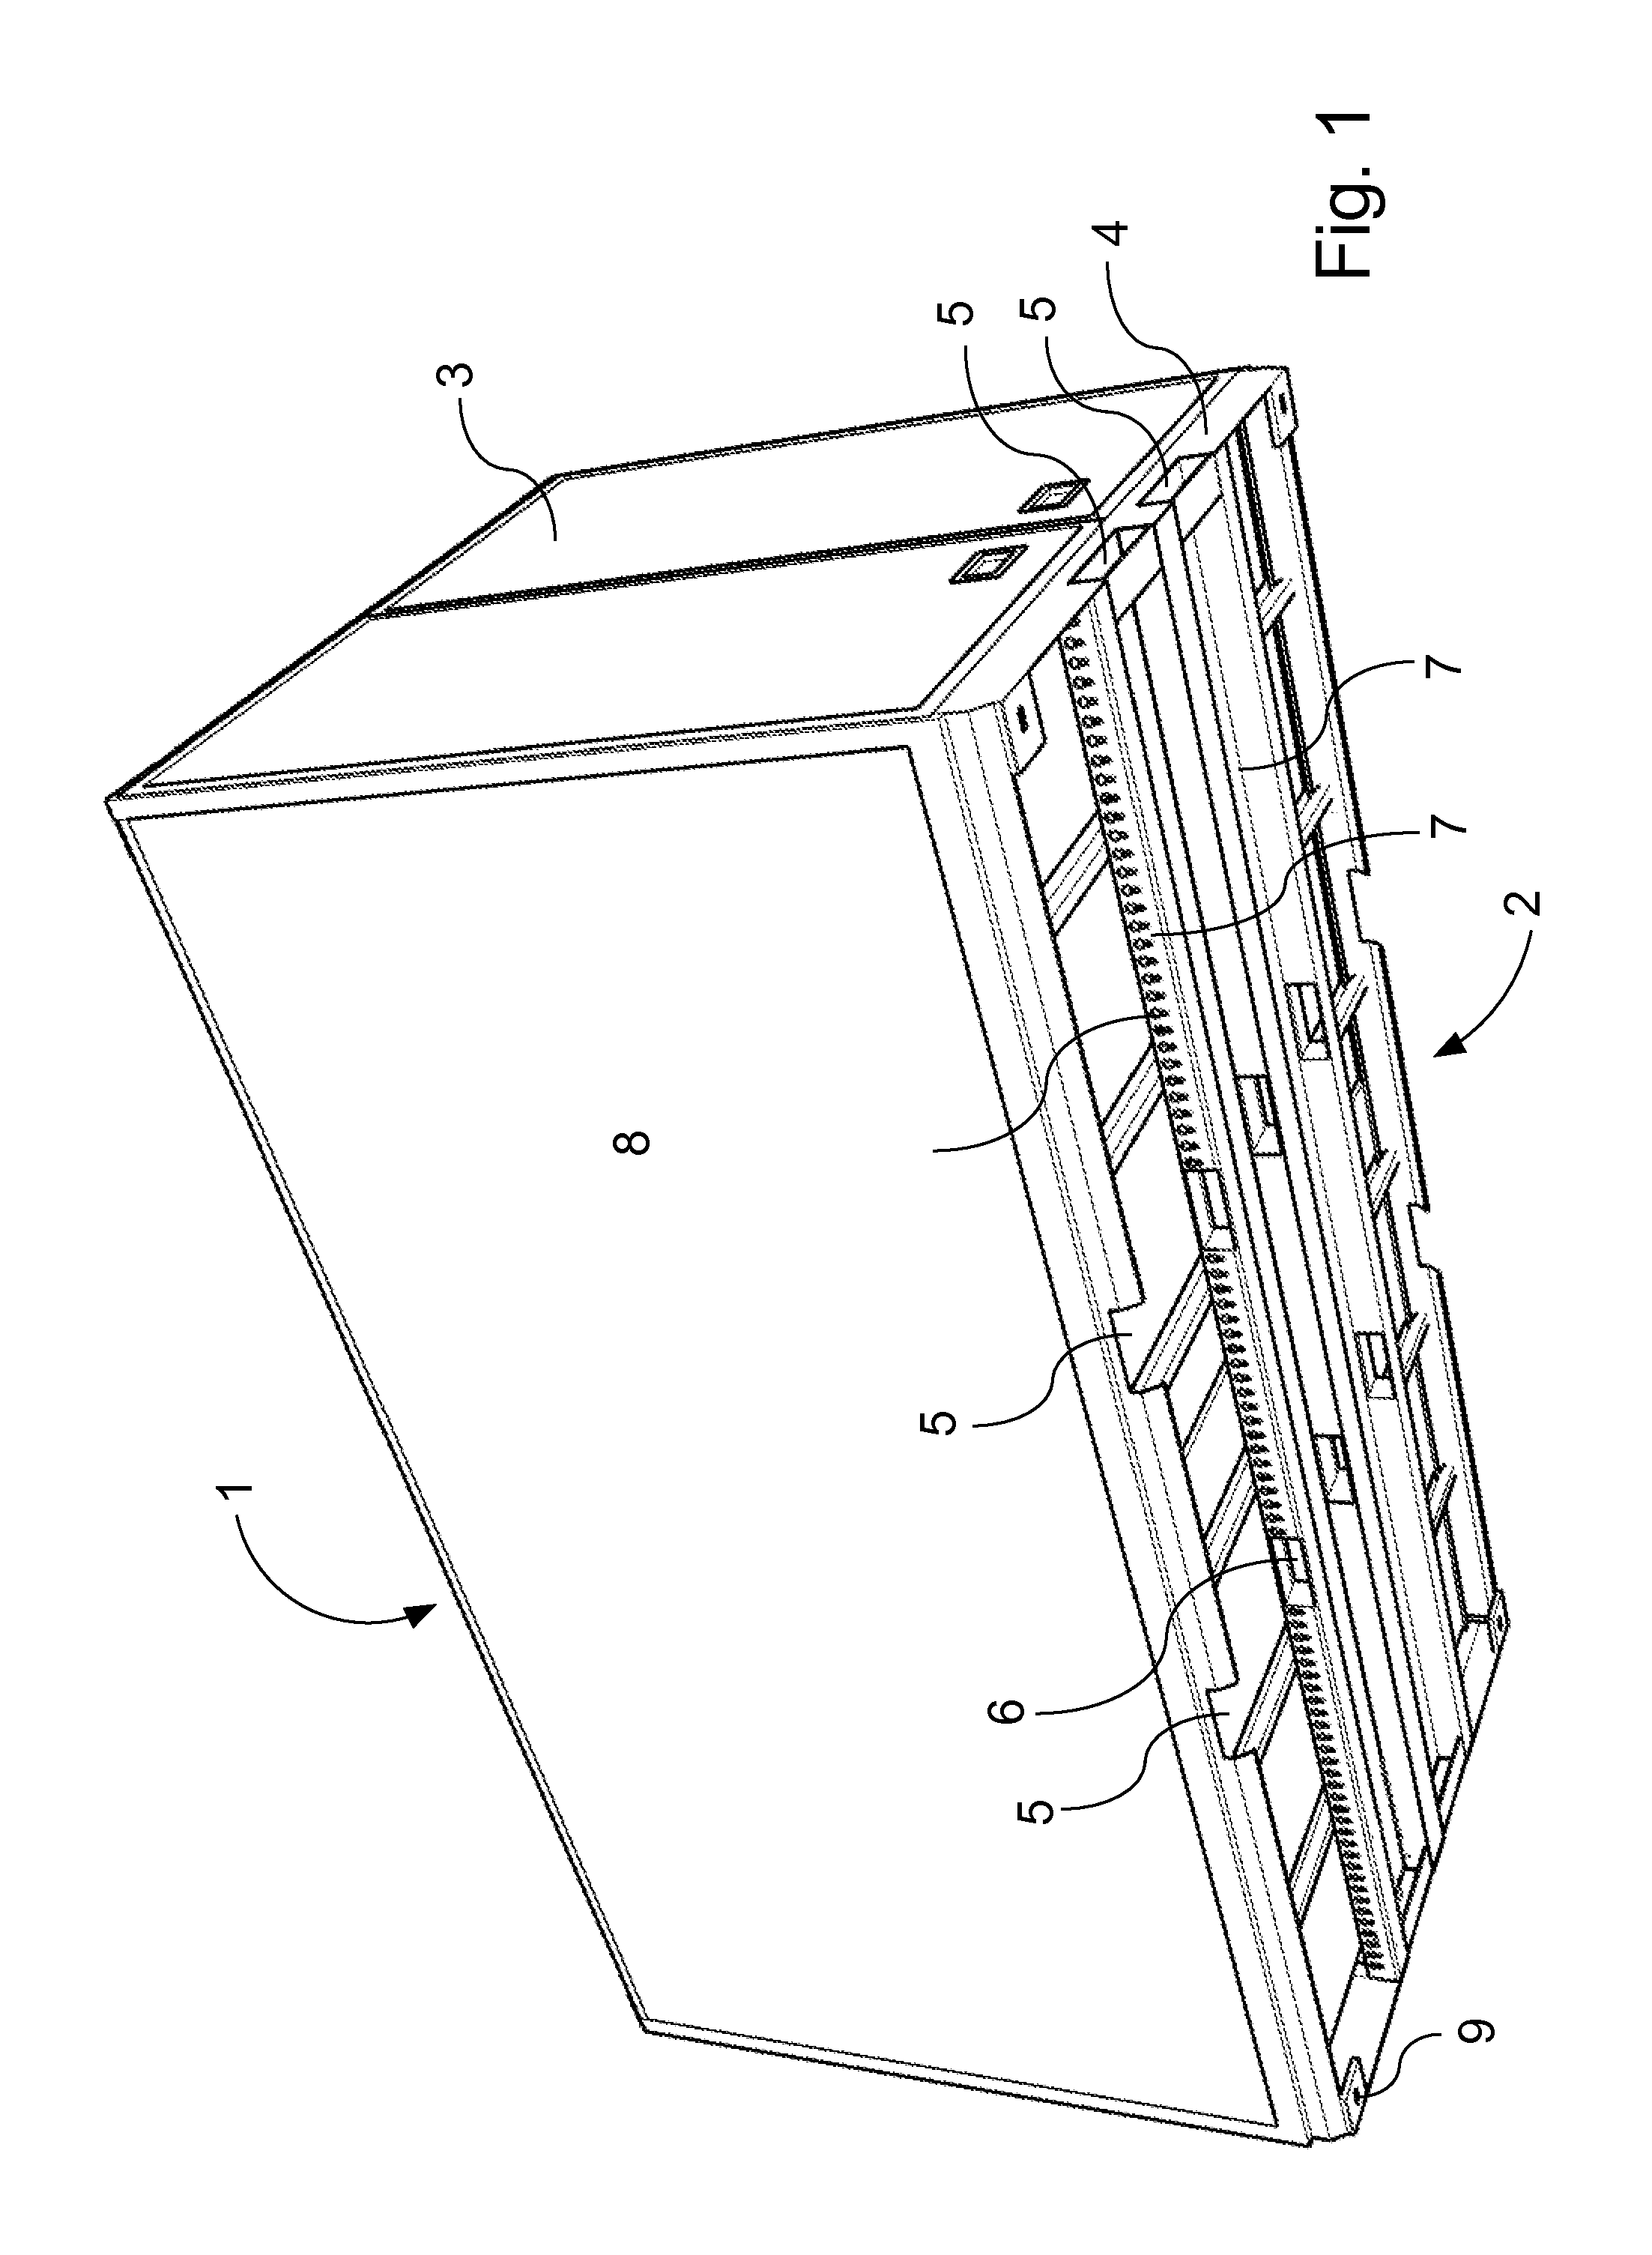 Attachment structure for supporting and releasably attaching a container, a corresponding support structure, a transport vehicle and a container